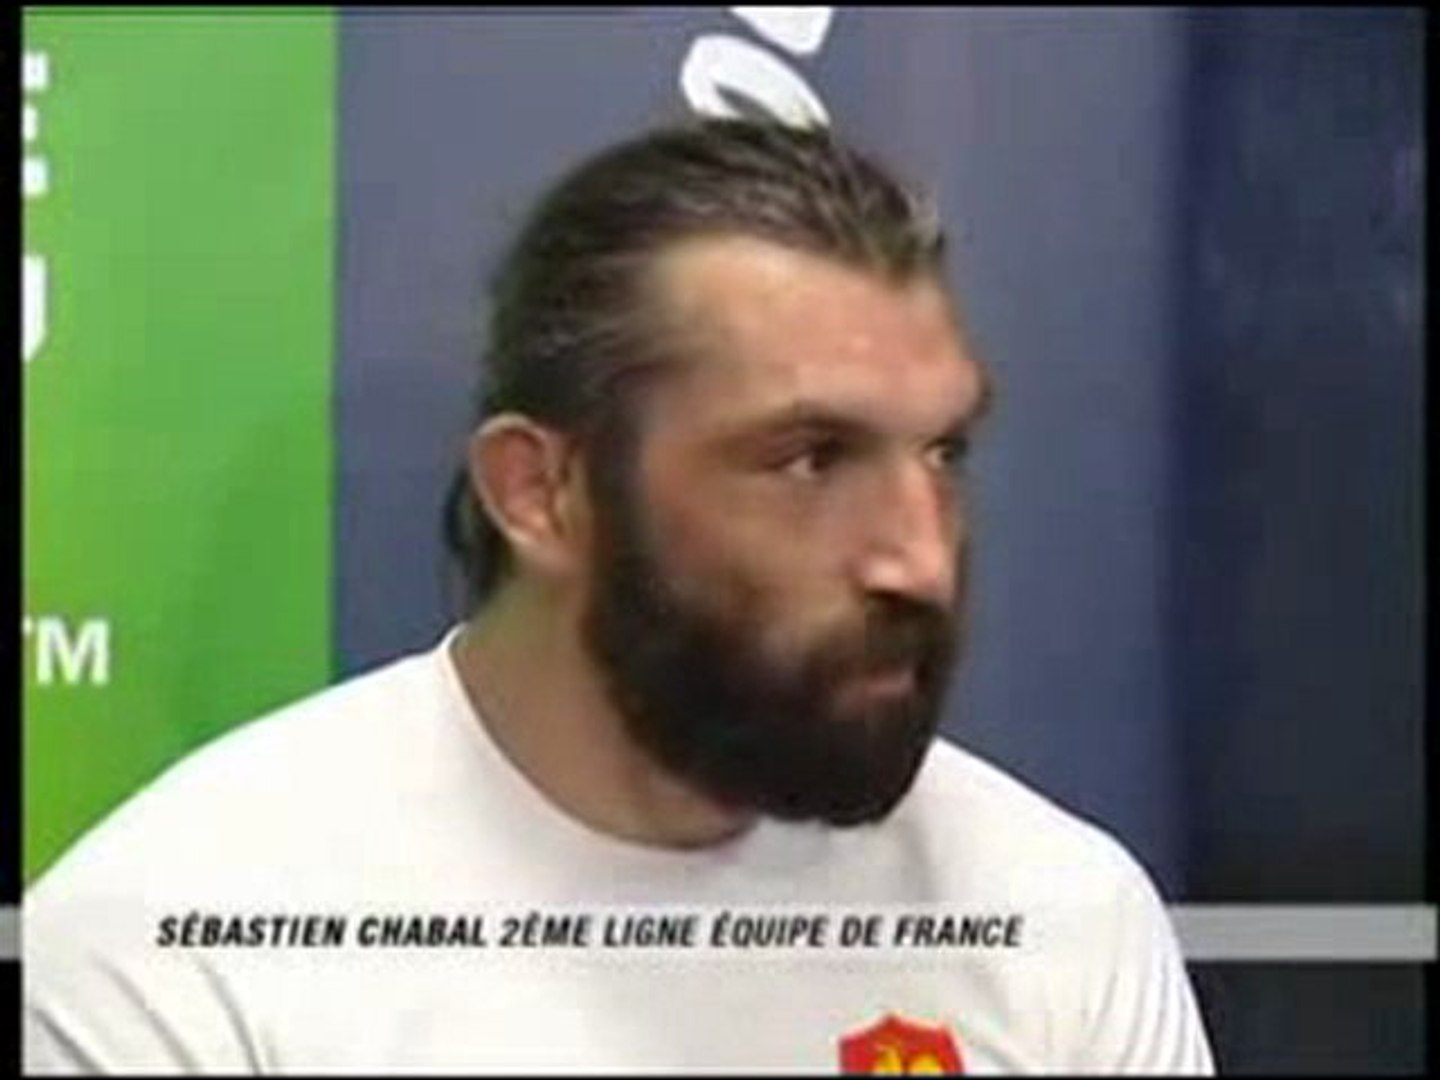 Sébastien Chabal: We are in France, we speak french - Vidéo Dailymotion